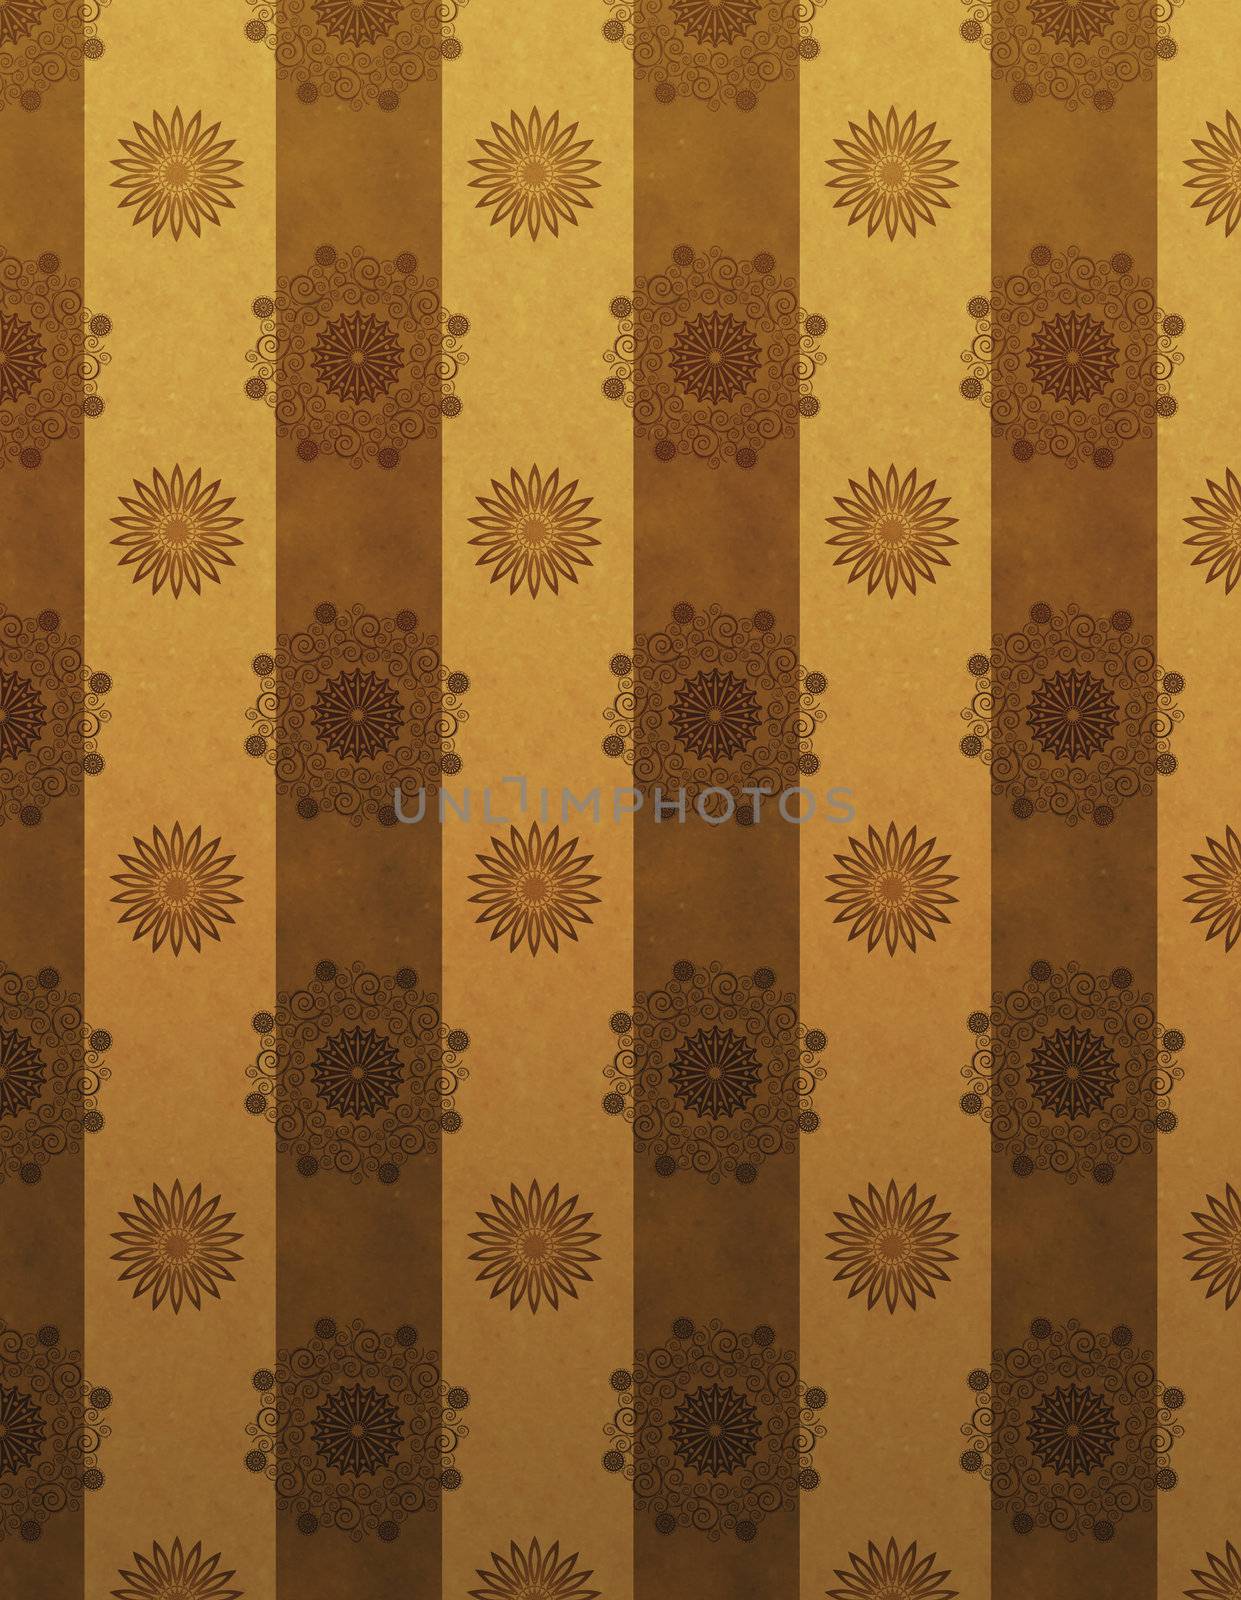 Created gold and brown retro wallpaper pattern, tiles side to side.